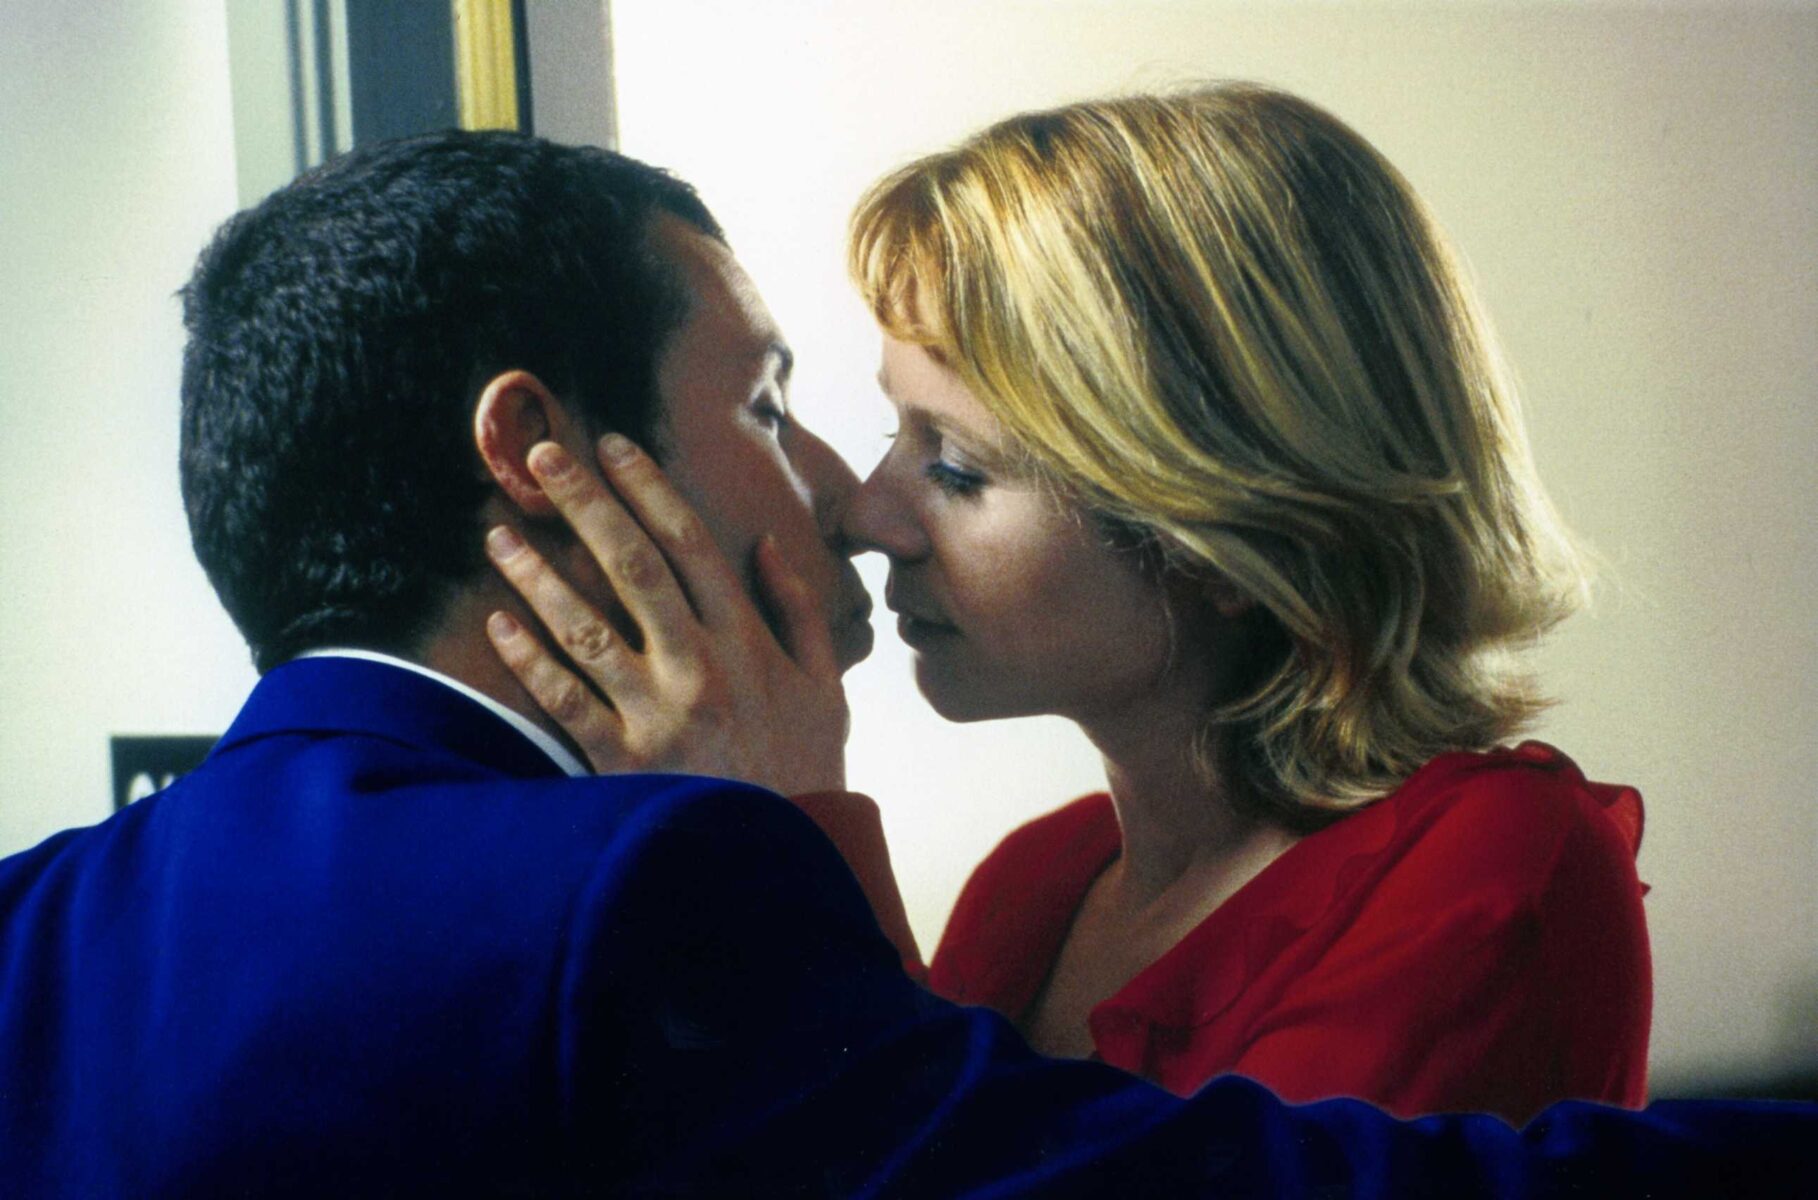 Punch drunk love 1 Anderson